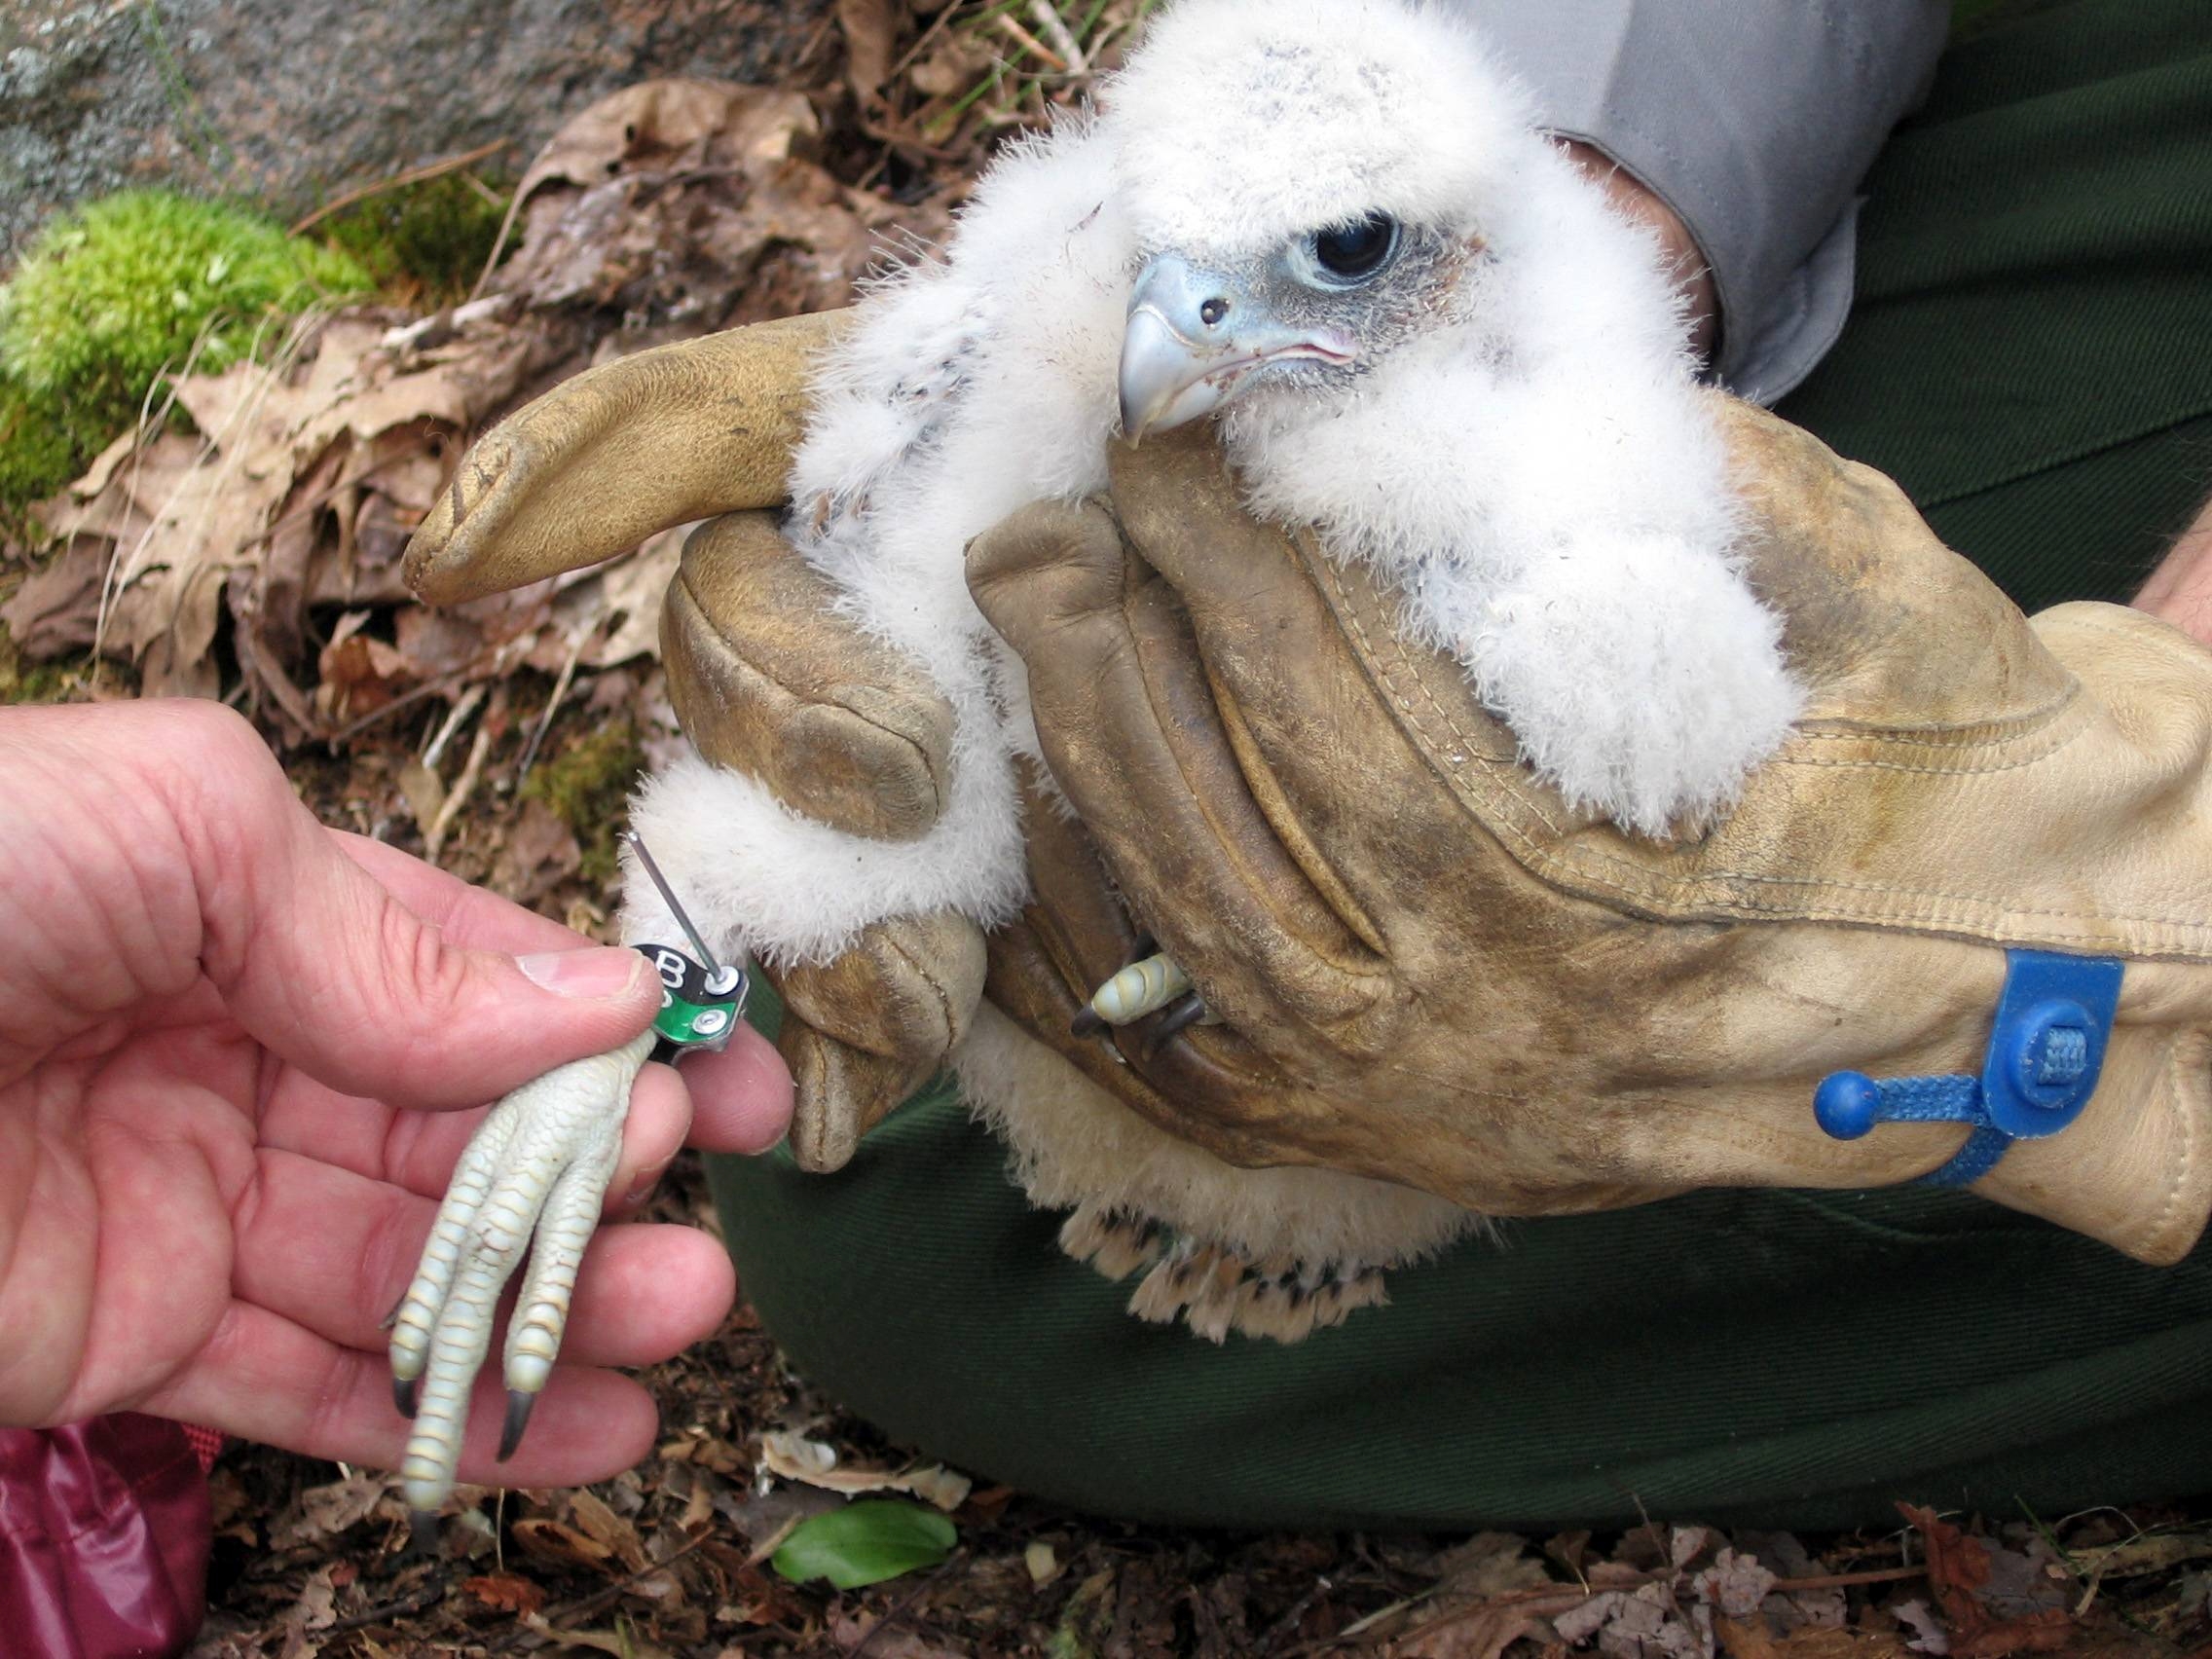 Peregrine falcon chick is held with hands in leather gloves